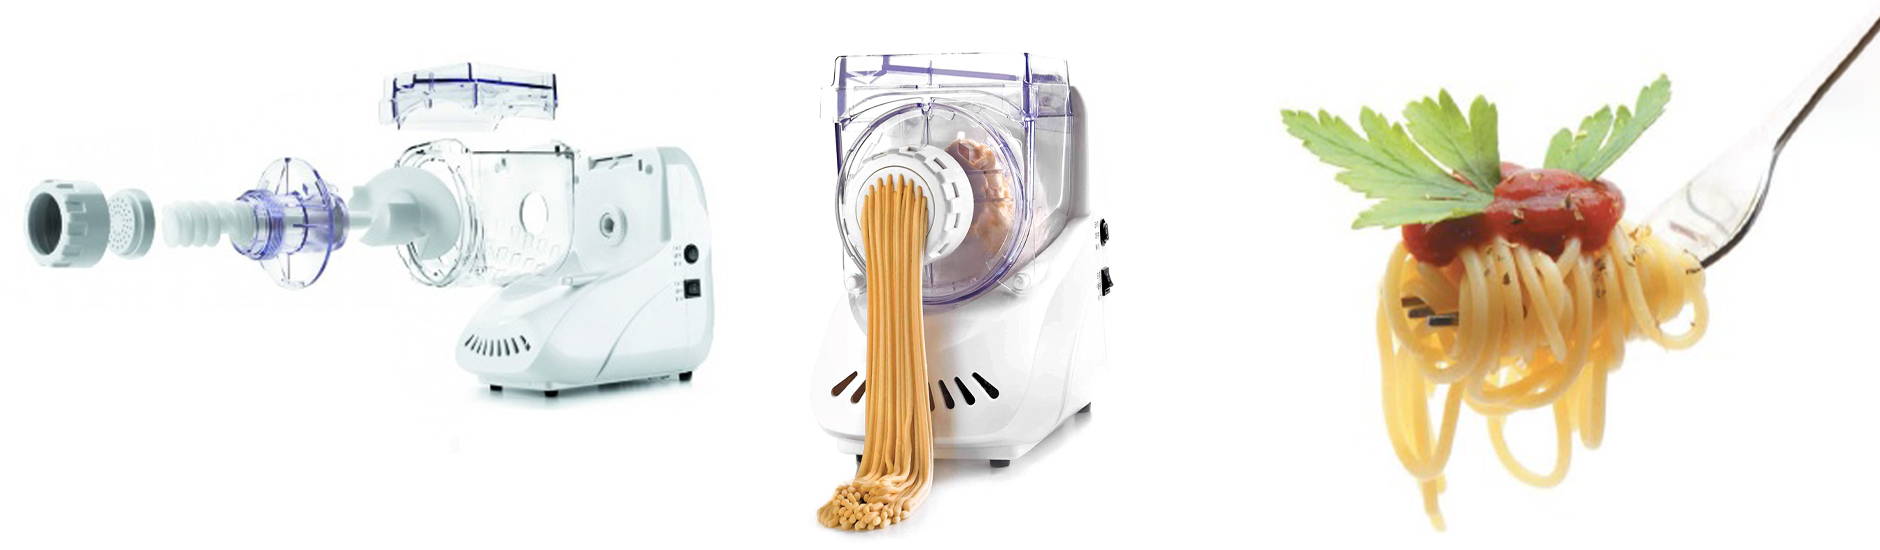 Equip Yourself with The Best Utensils to Make Homemade Pasta